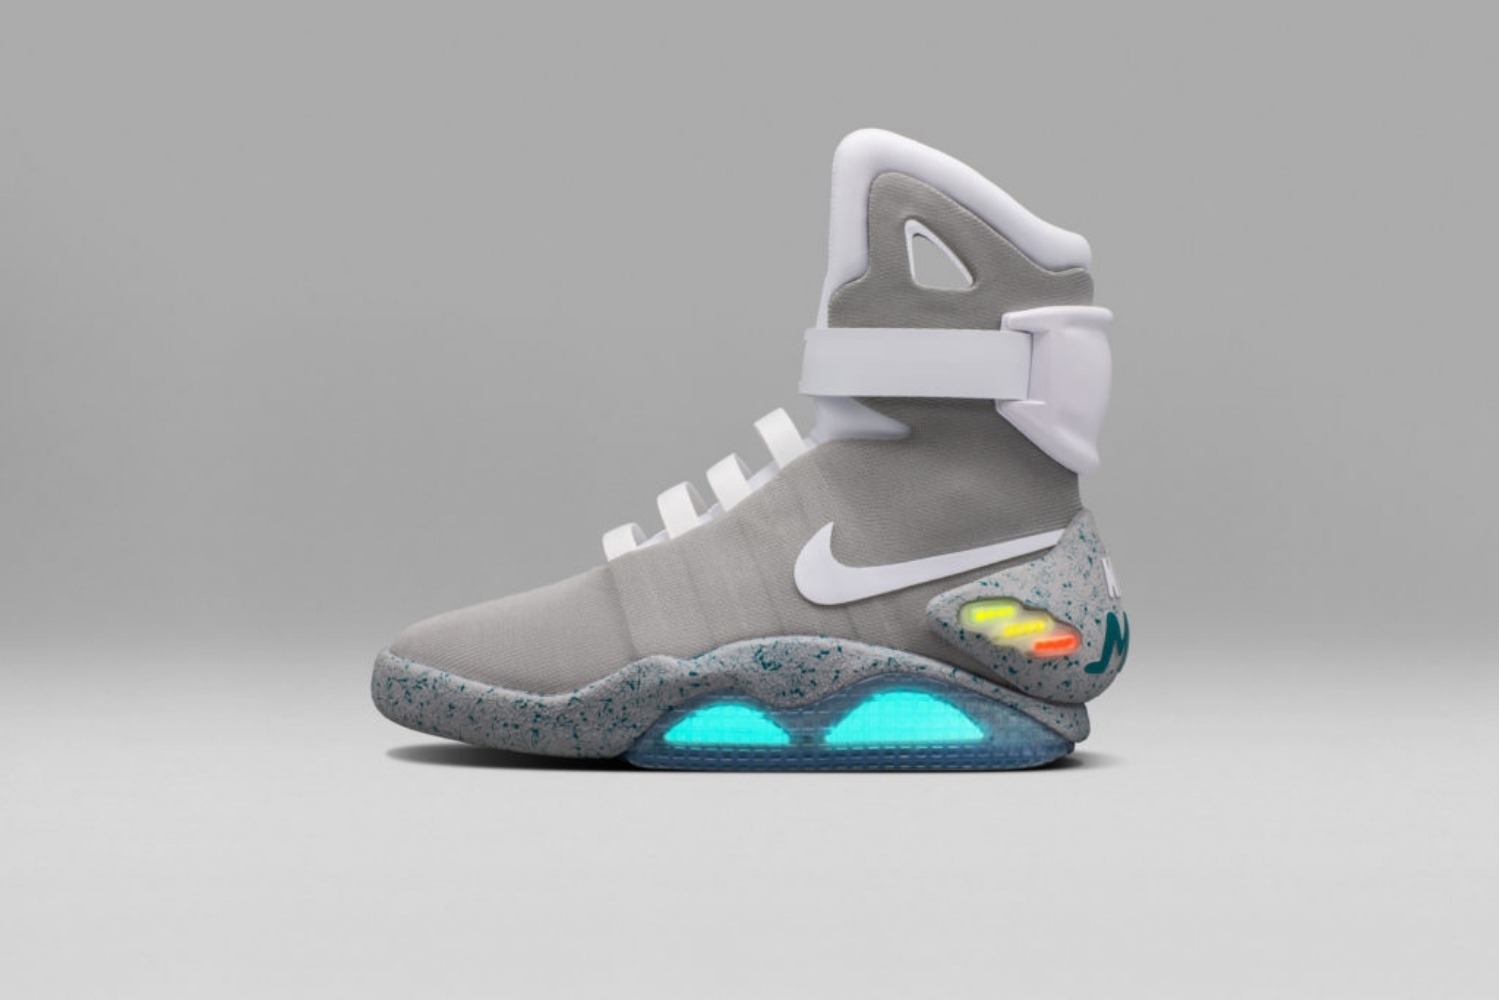 The Nike Air Mag - Extremely Expensive - Extremely Limited